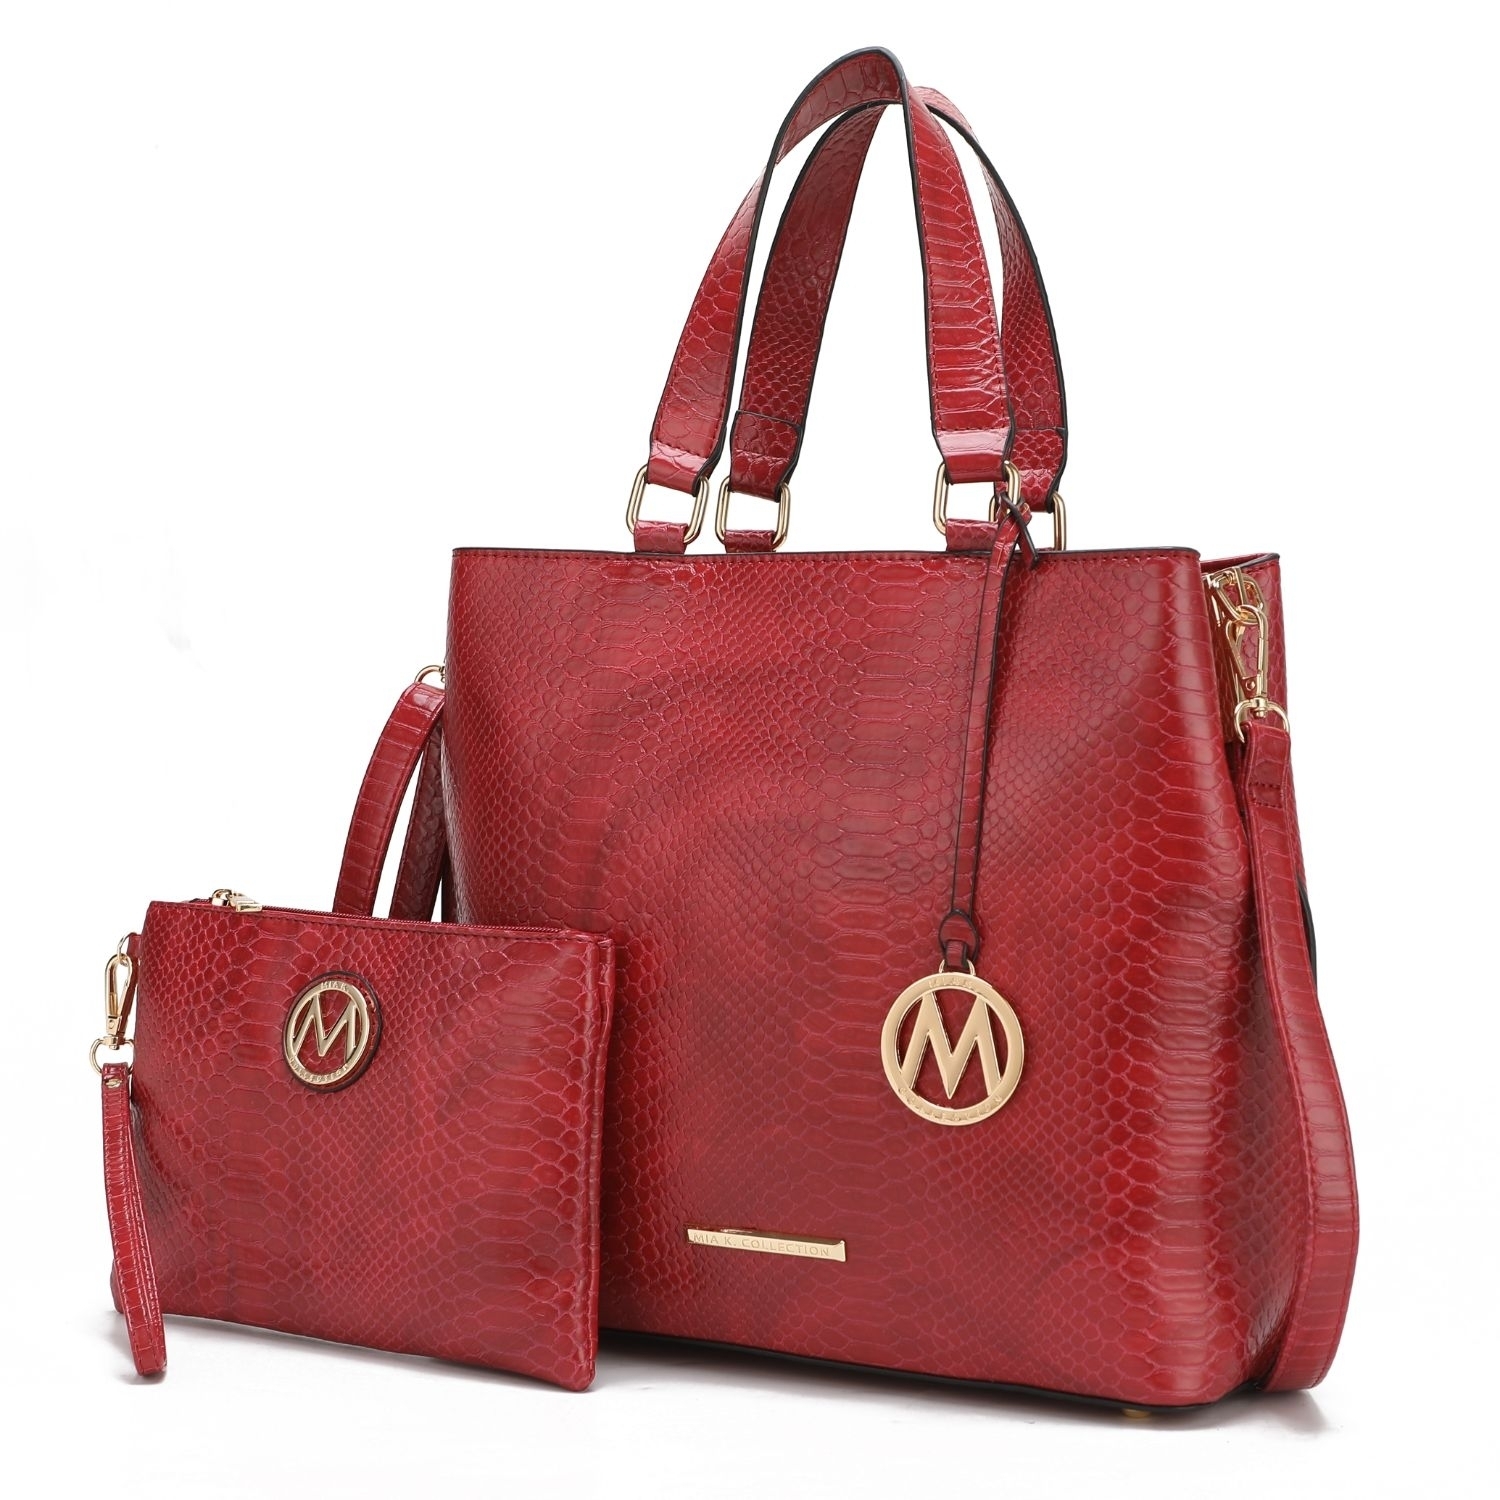 MKF Collection Beryl Snake-embossed Vegan Leather Women's Tote Handbag With Wristlet - 2 Pieces, By Mia K - Red